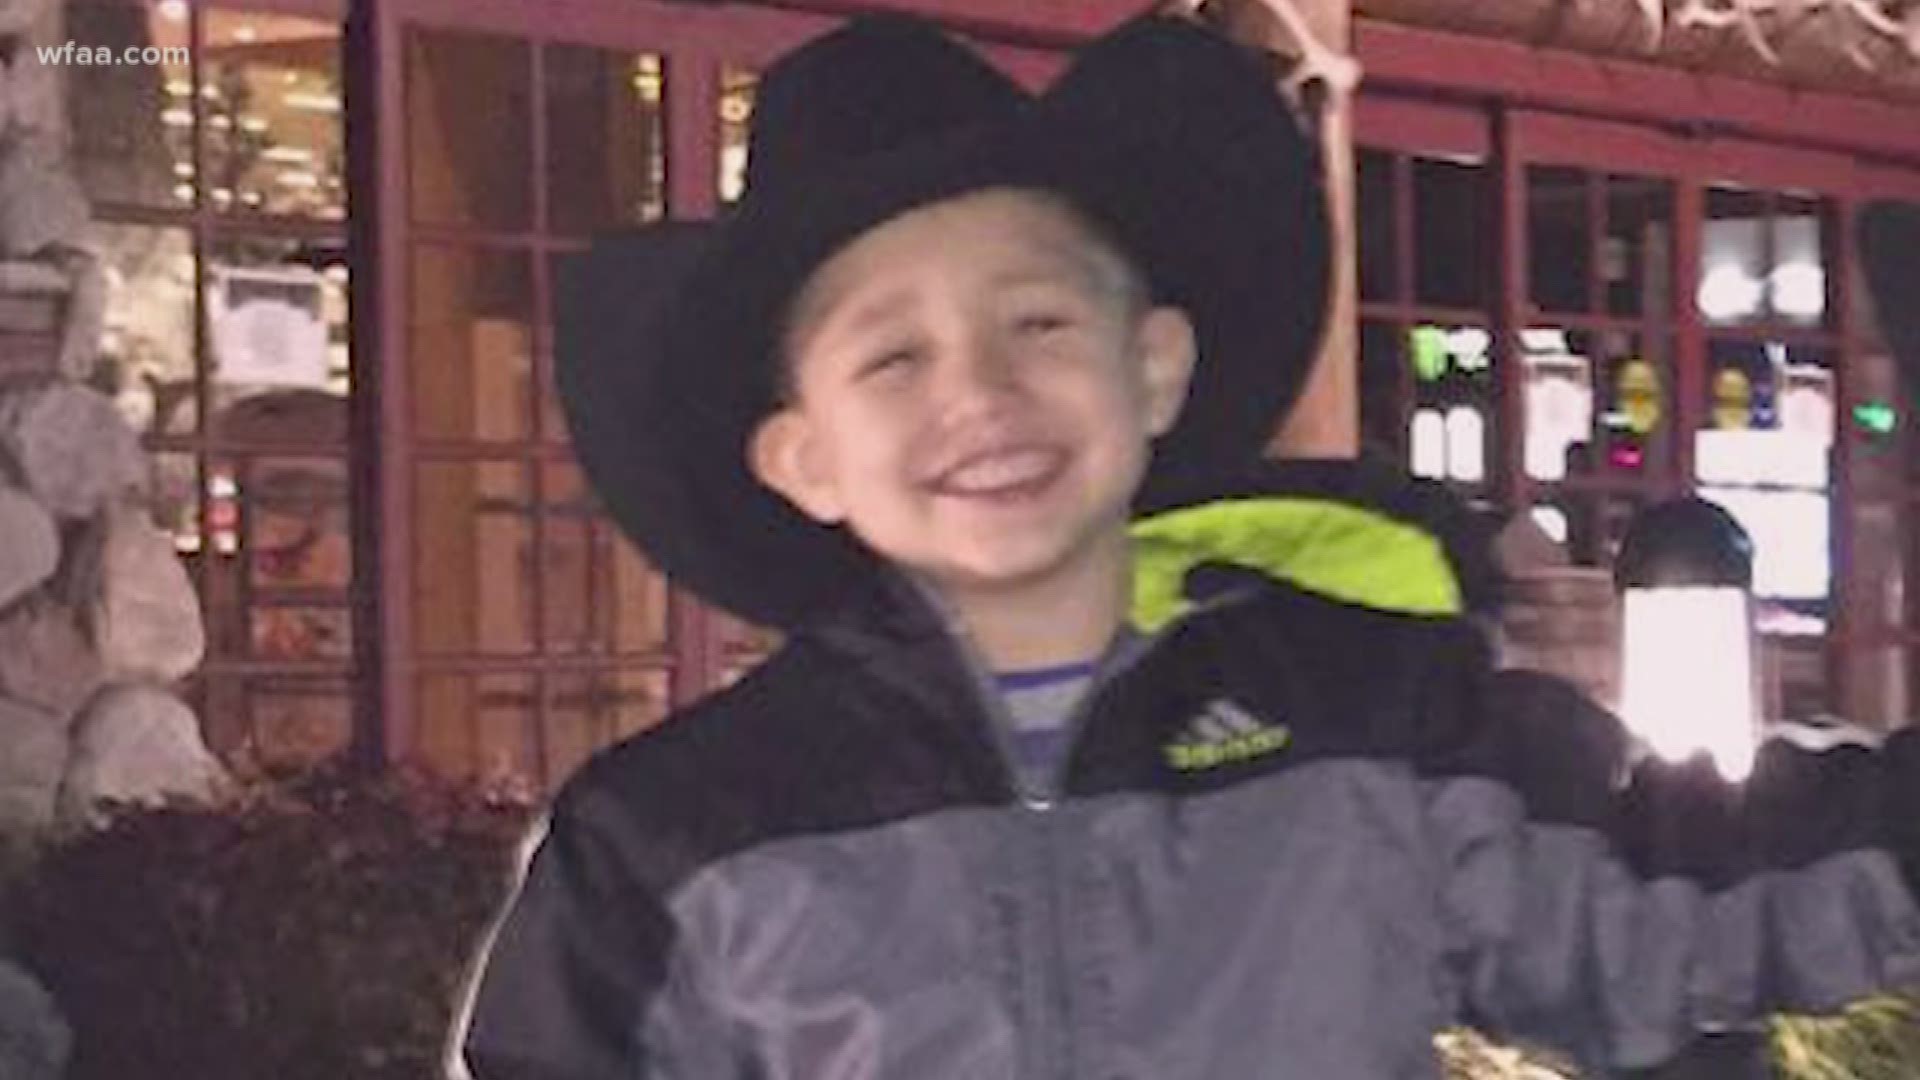 Nico Johnson’s family says the boy is the victim of an international child abduction.